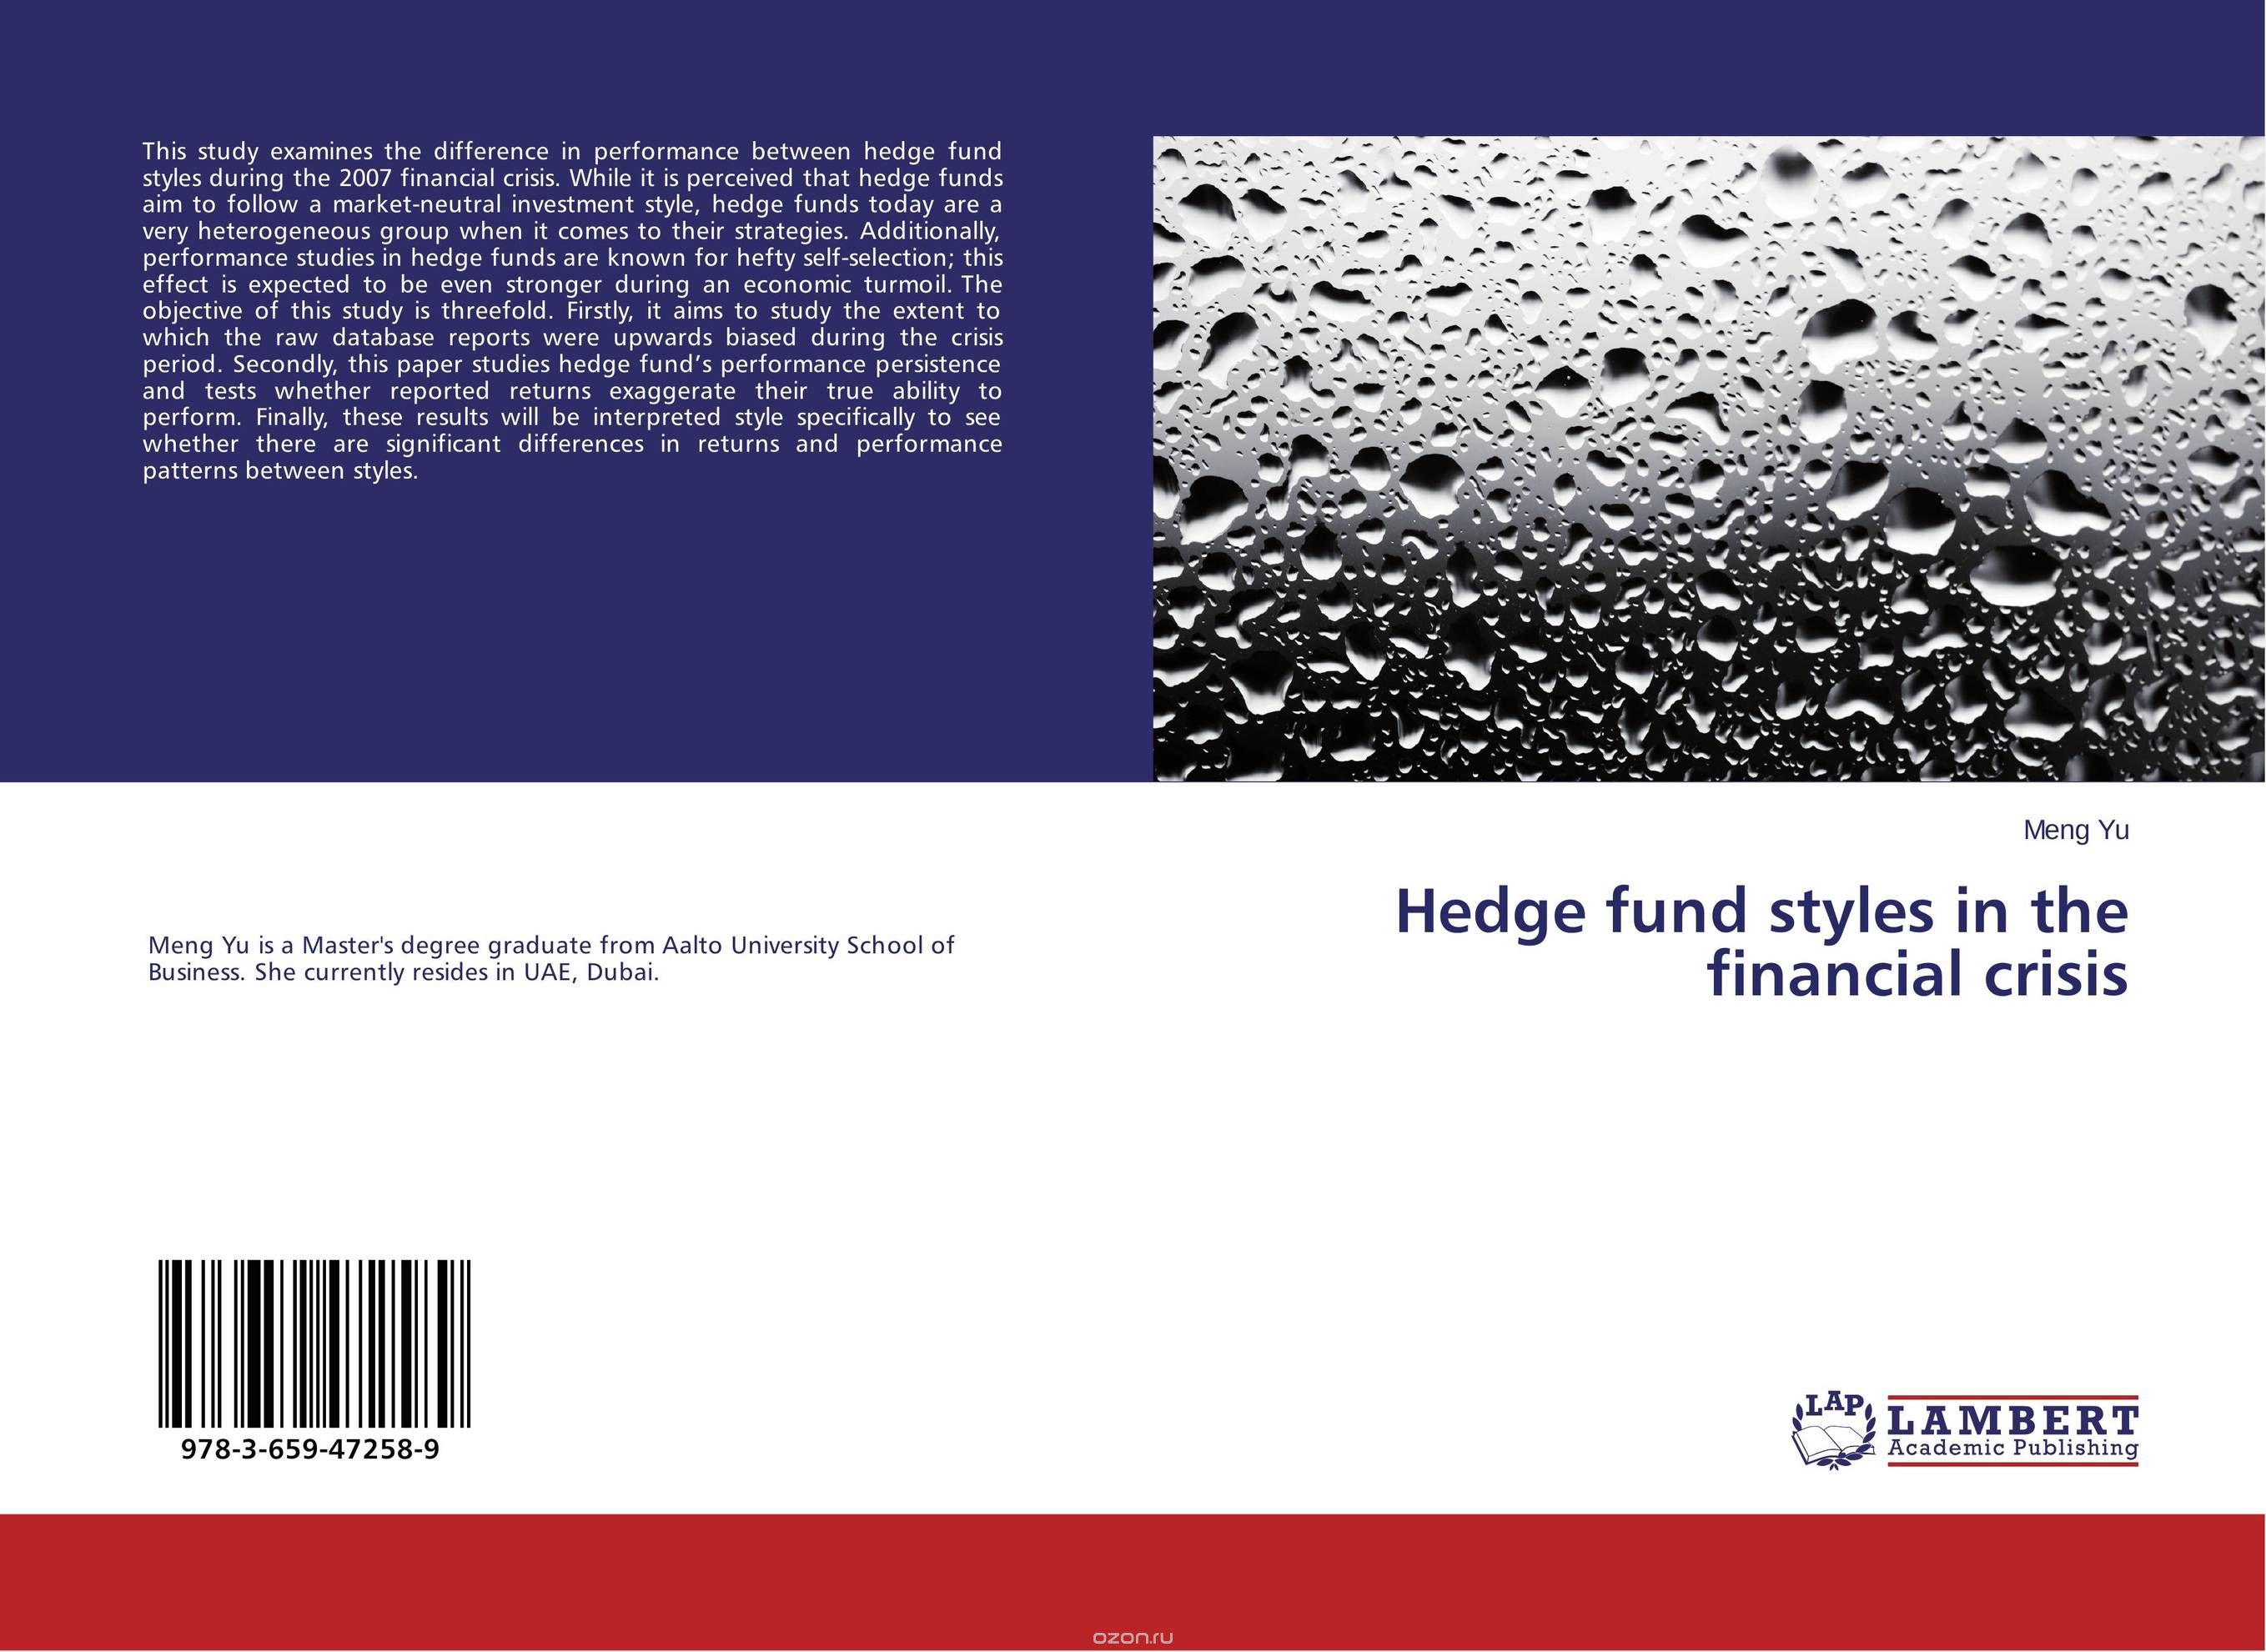 Hedge fund styles in the financial crisis